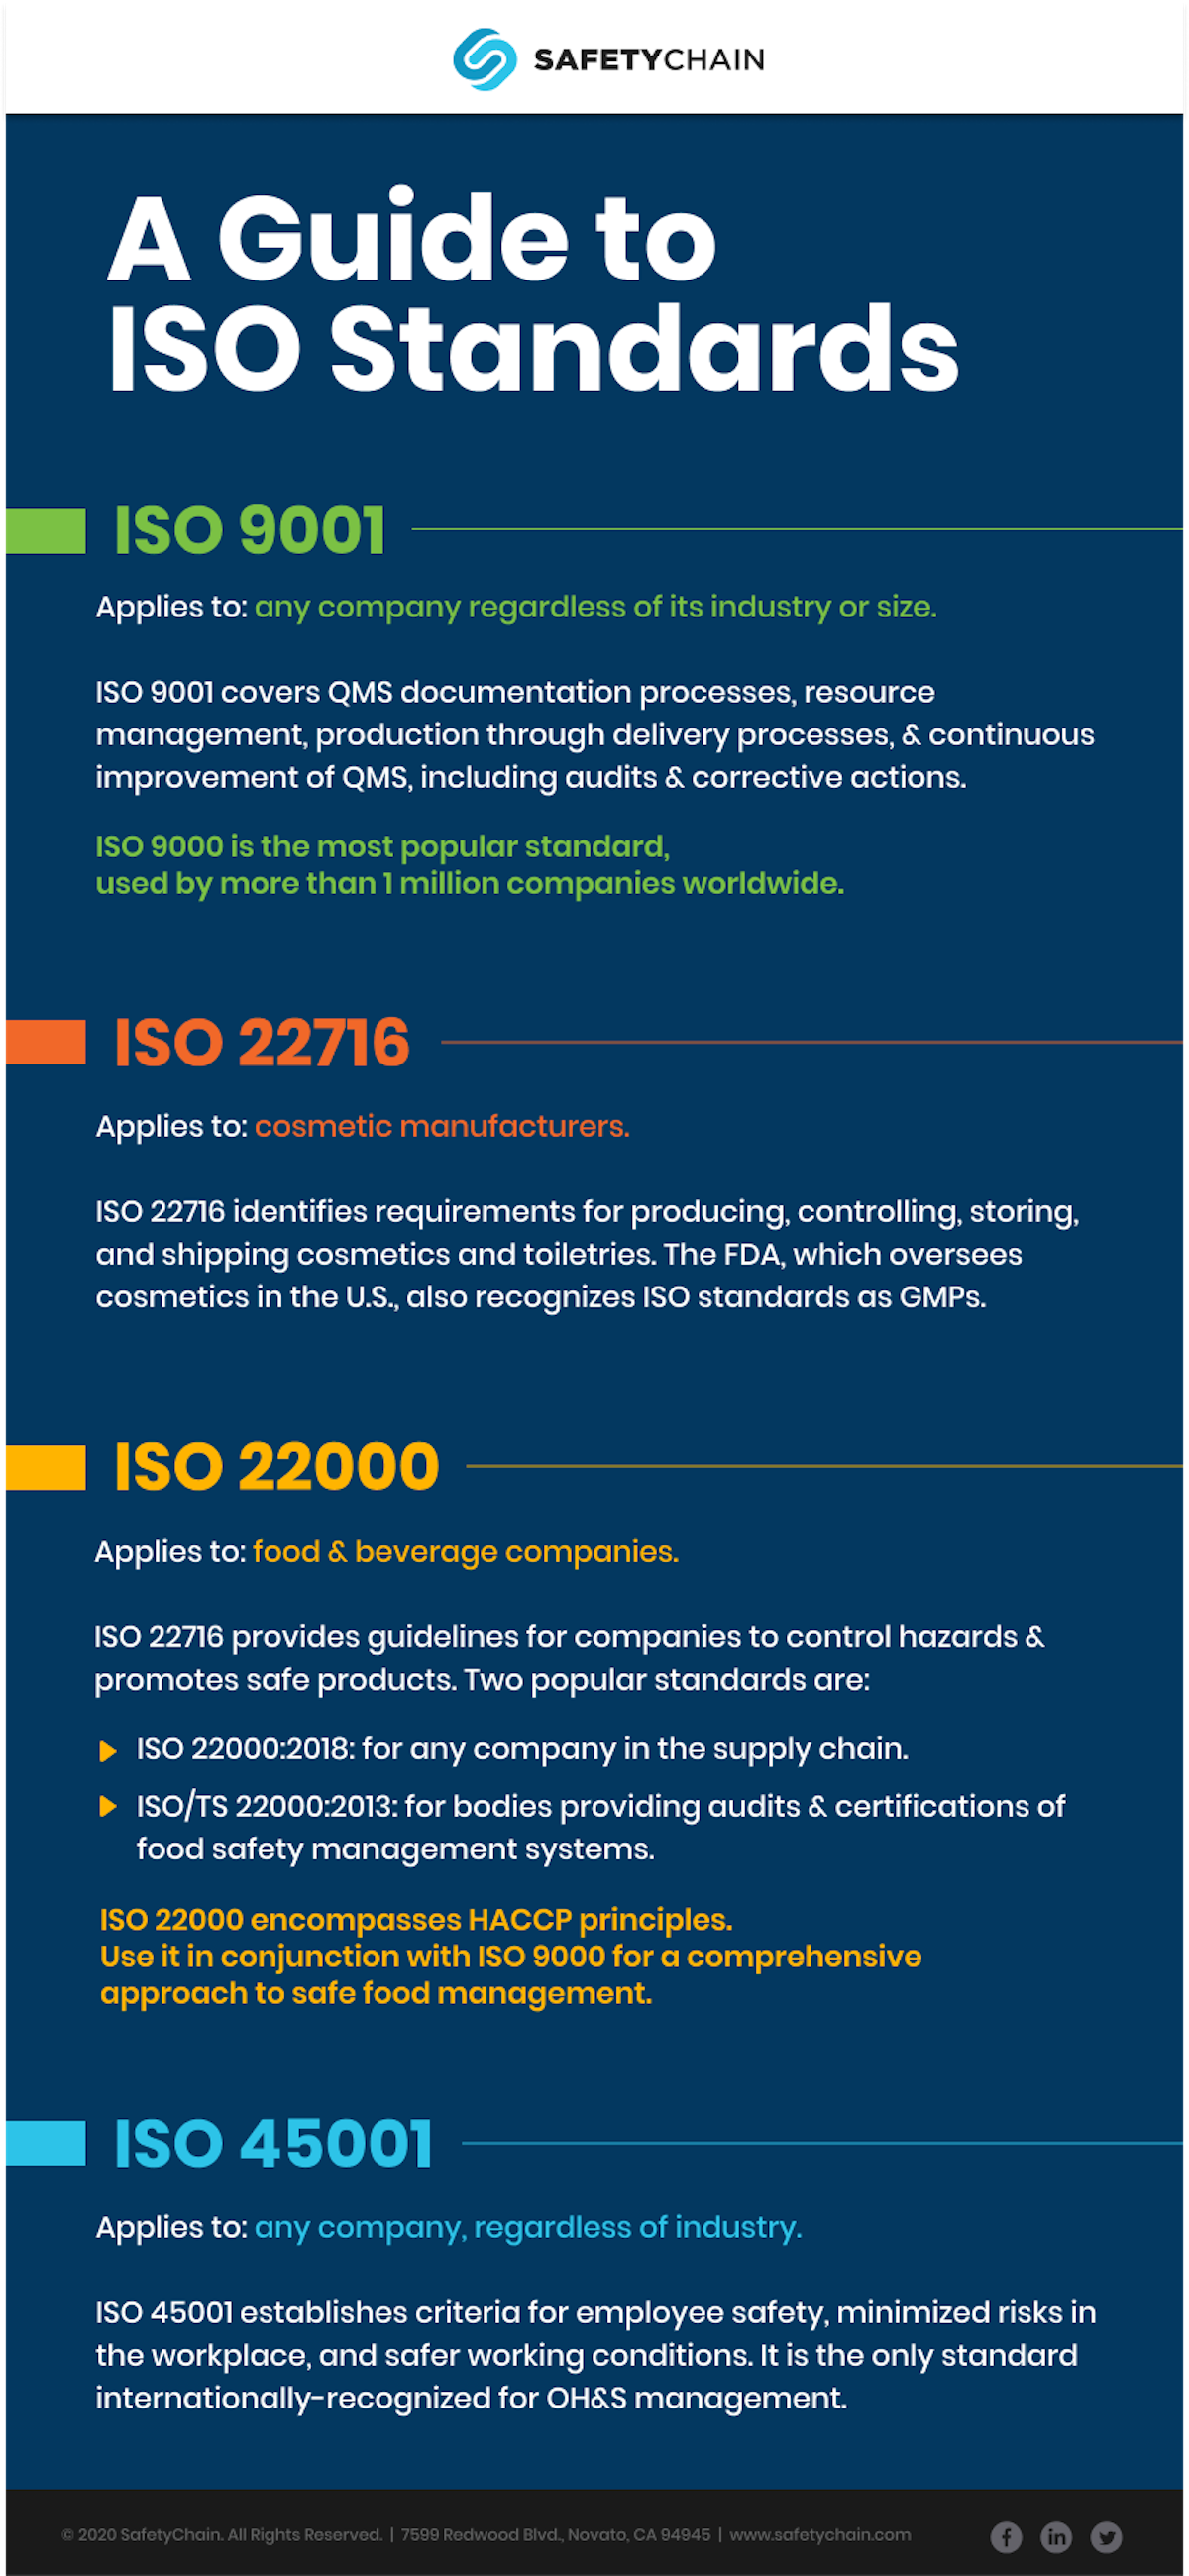 infographic download with "a guide to ISO standards"